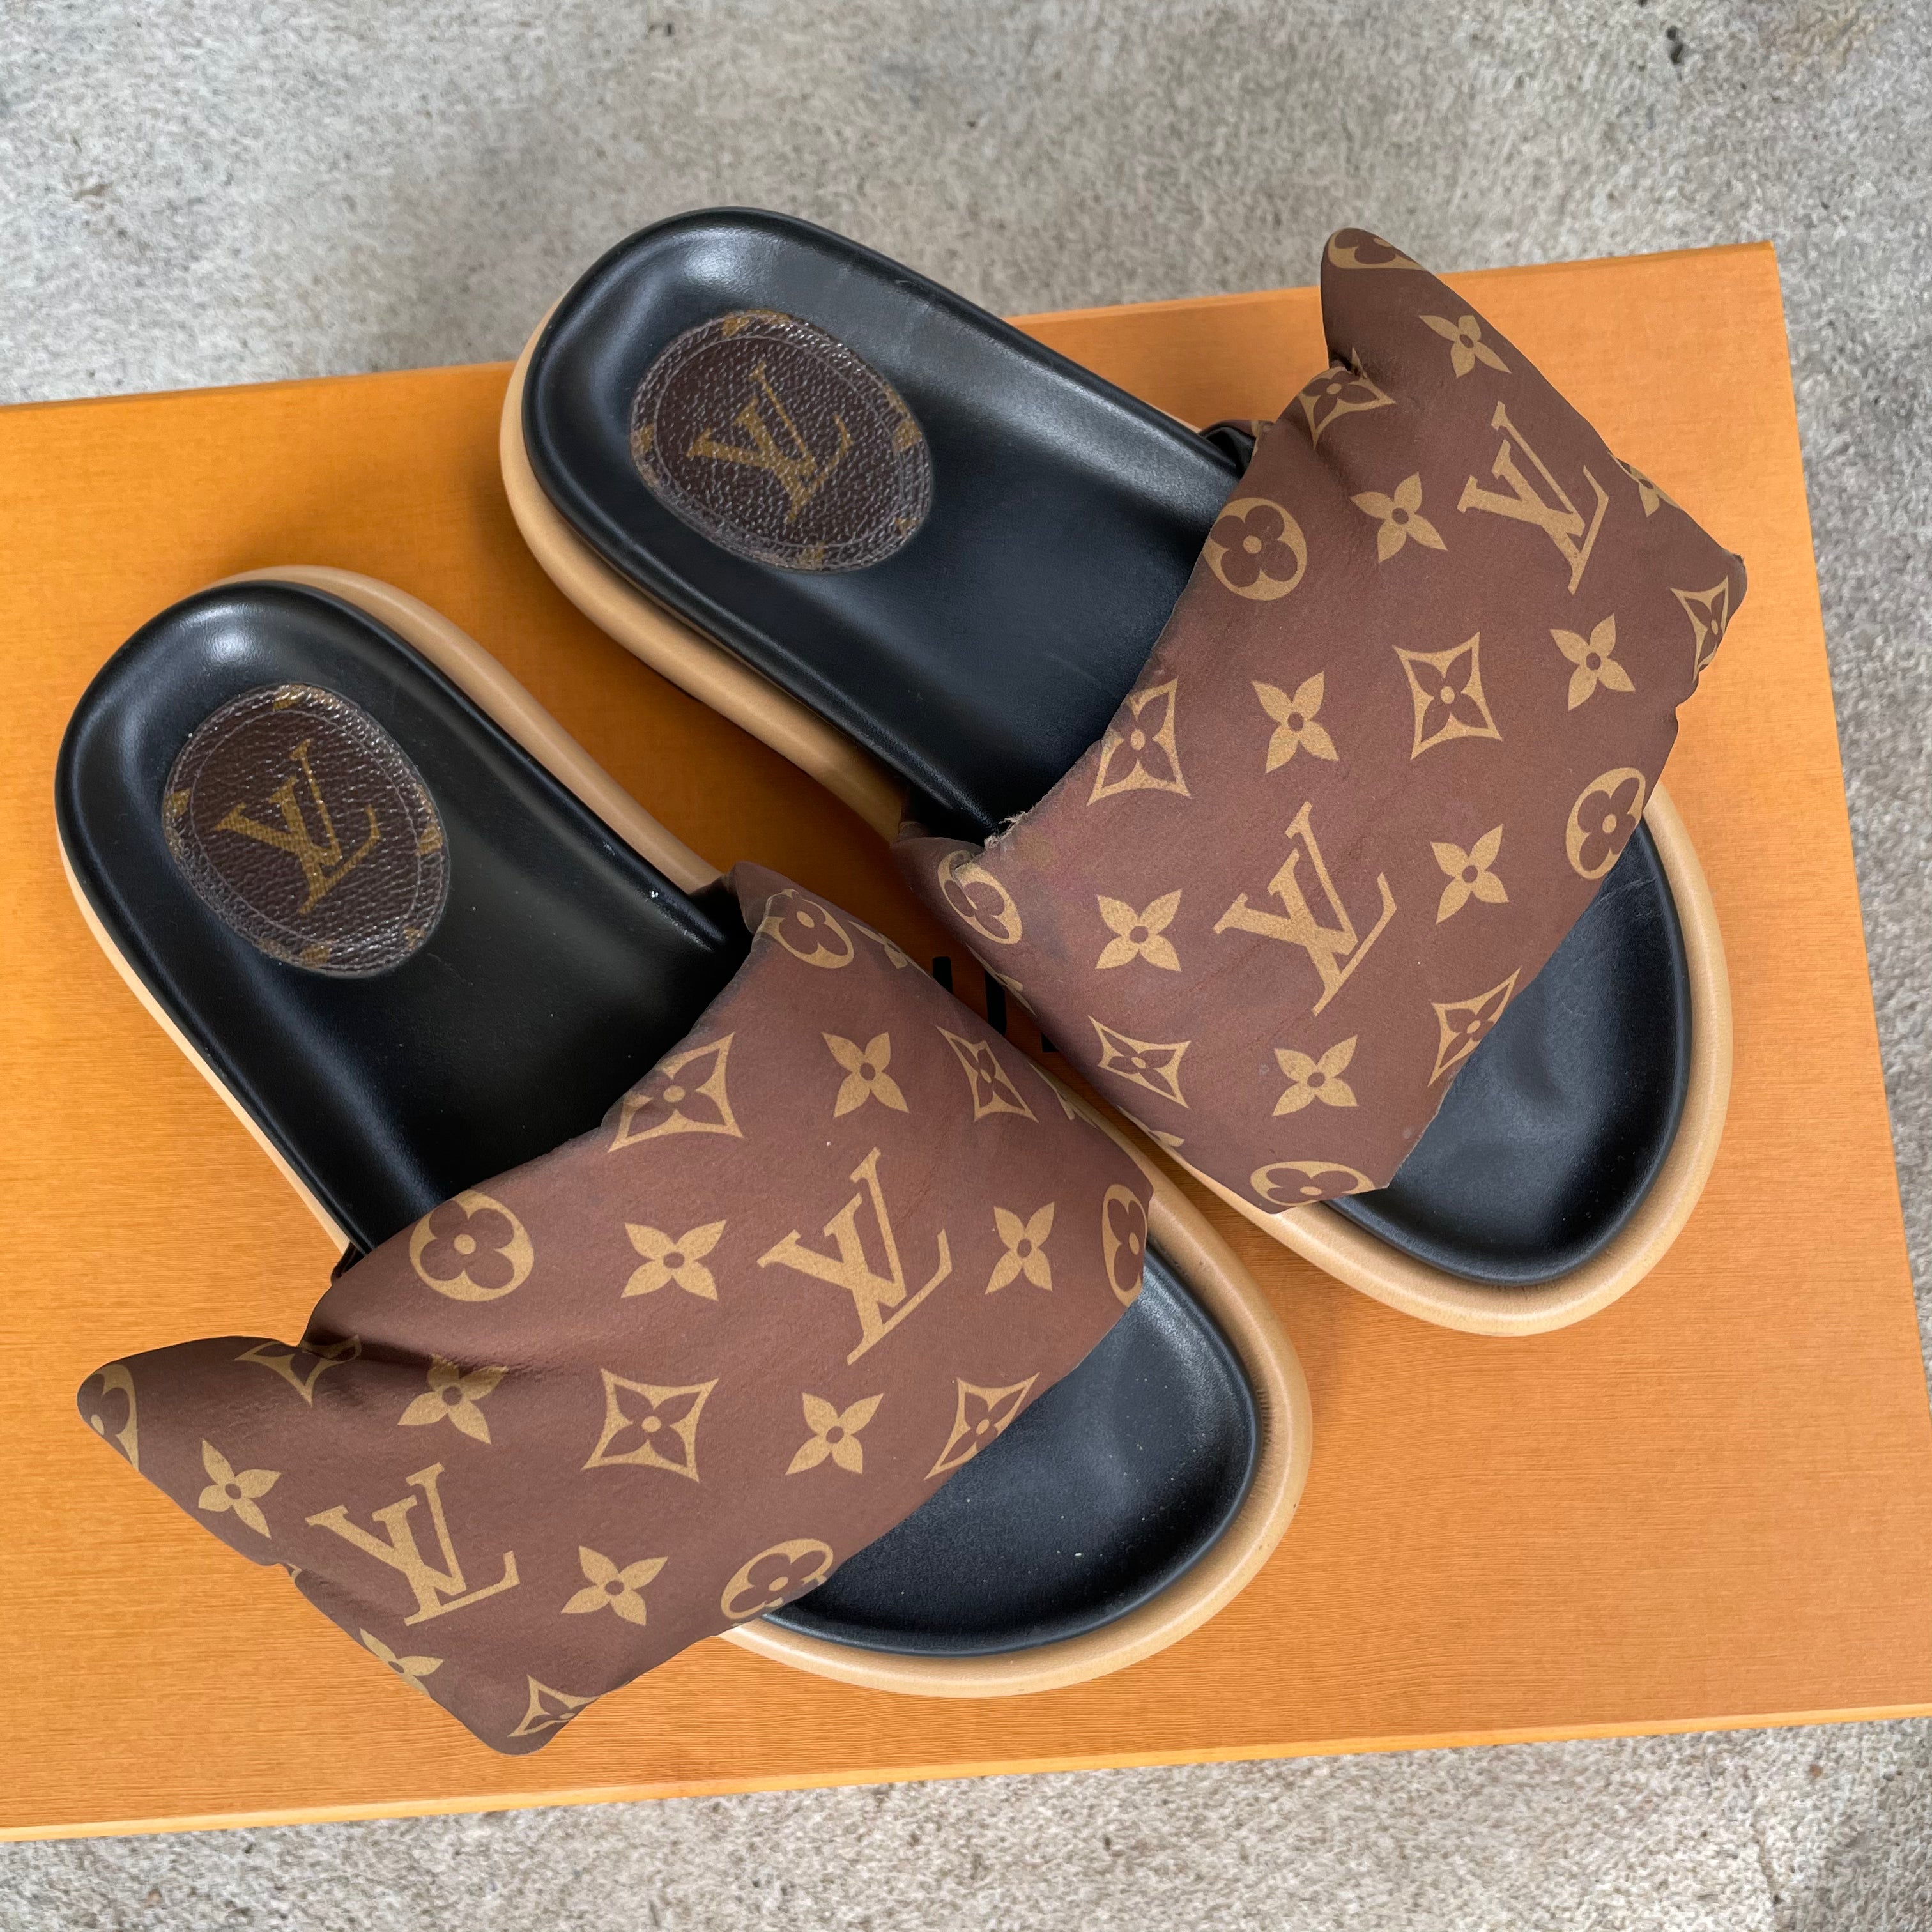 Louis Vuitton Pillow Sliders - For Sale on 1stDibs